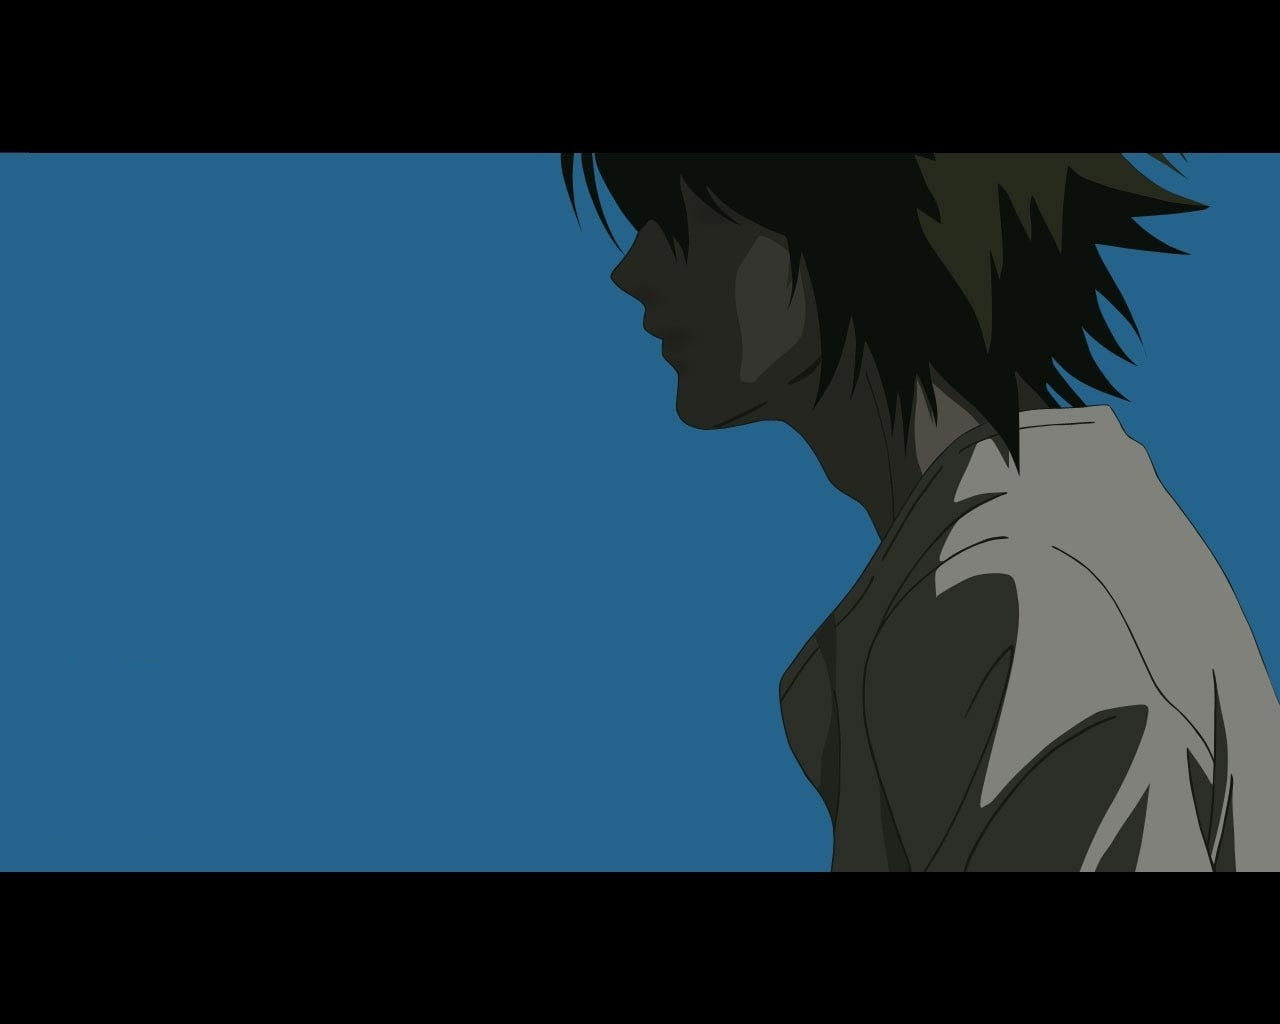 Black Haired Male Anime, Death Note, Lawliet L, Anime HD Wallpaper